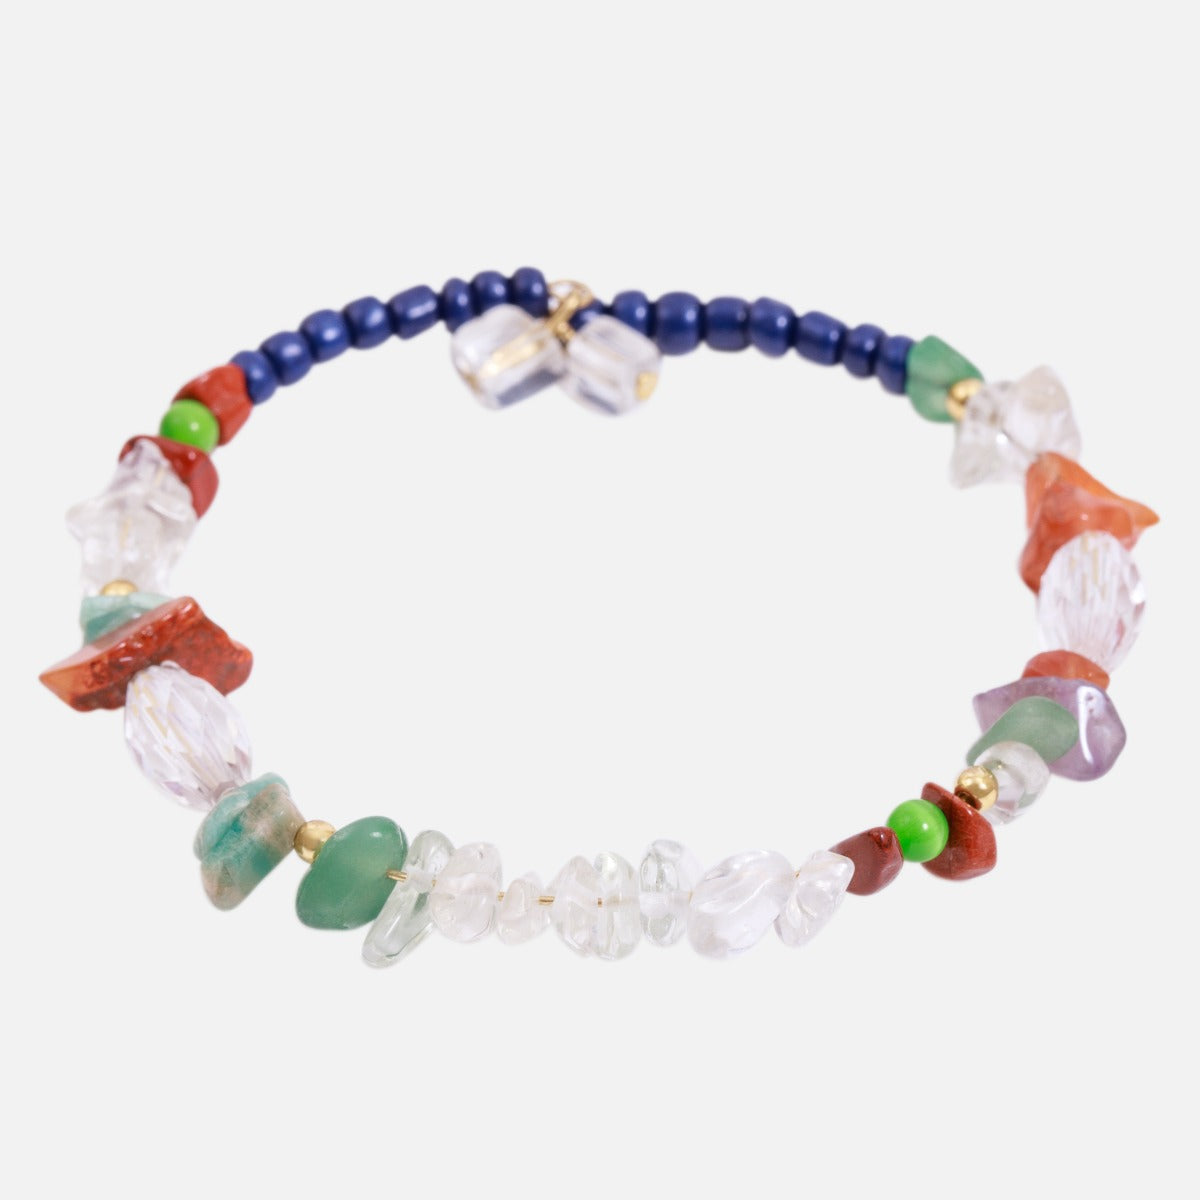 Bracelet with colored beads